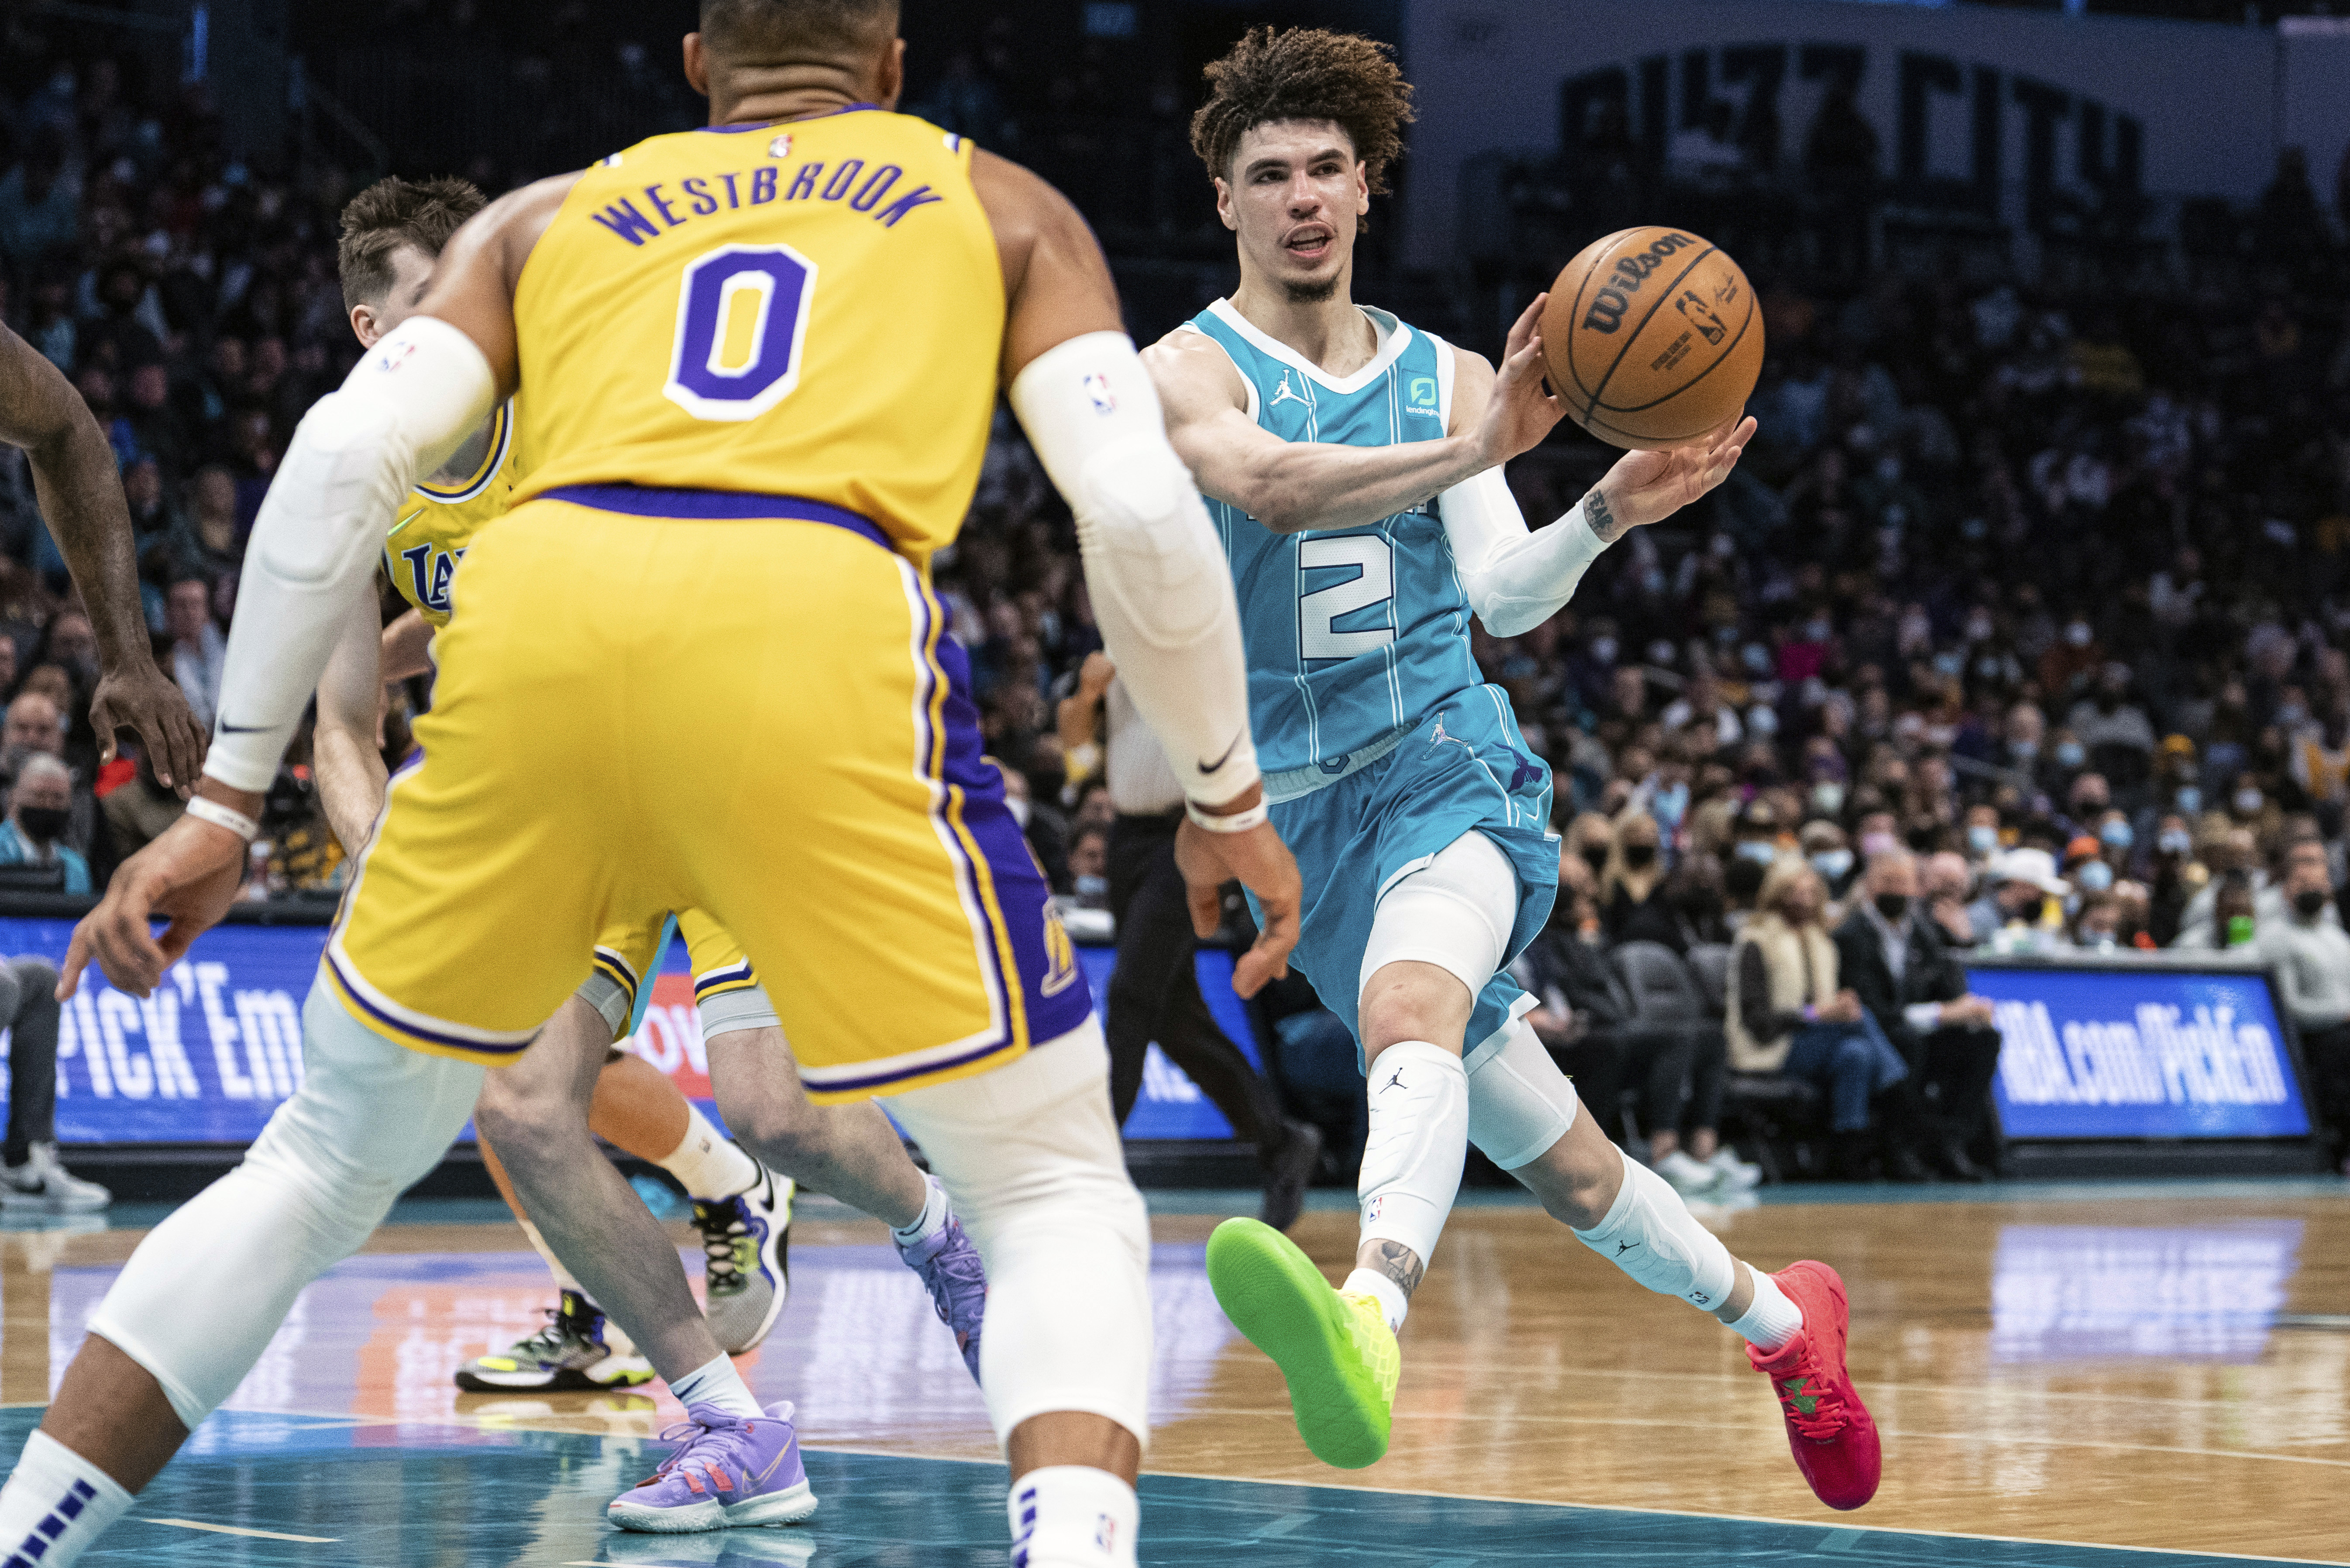 Where can I find the calf sleeves LaMelo is wearing in this photo? They  look really clean. : r/CharlotteHornets